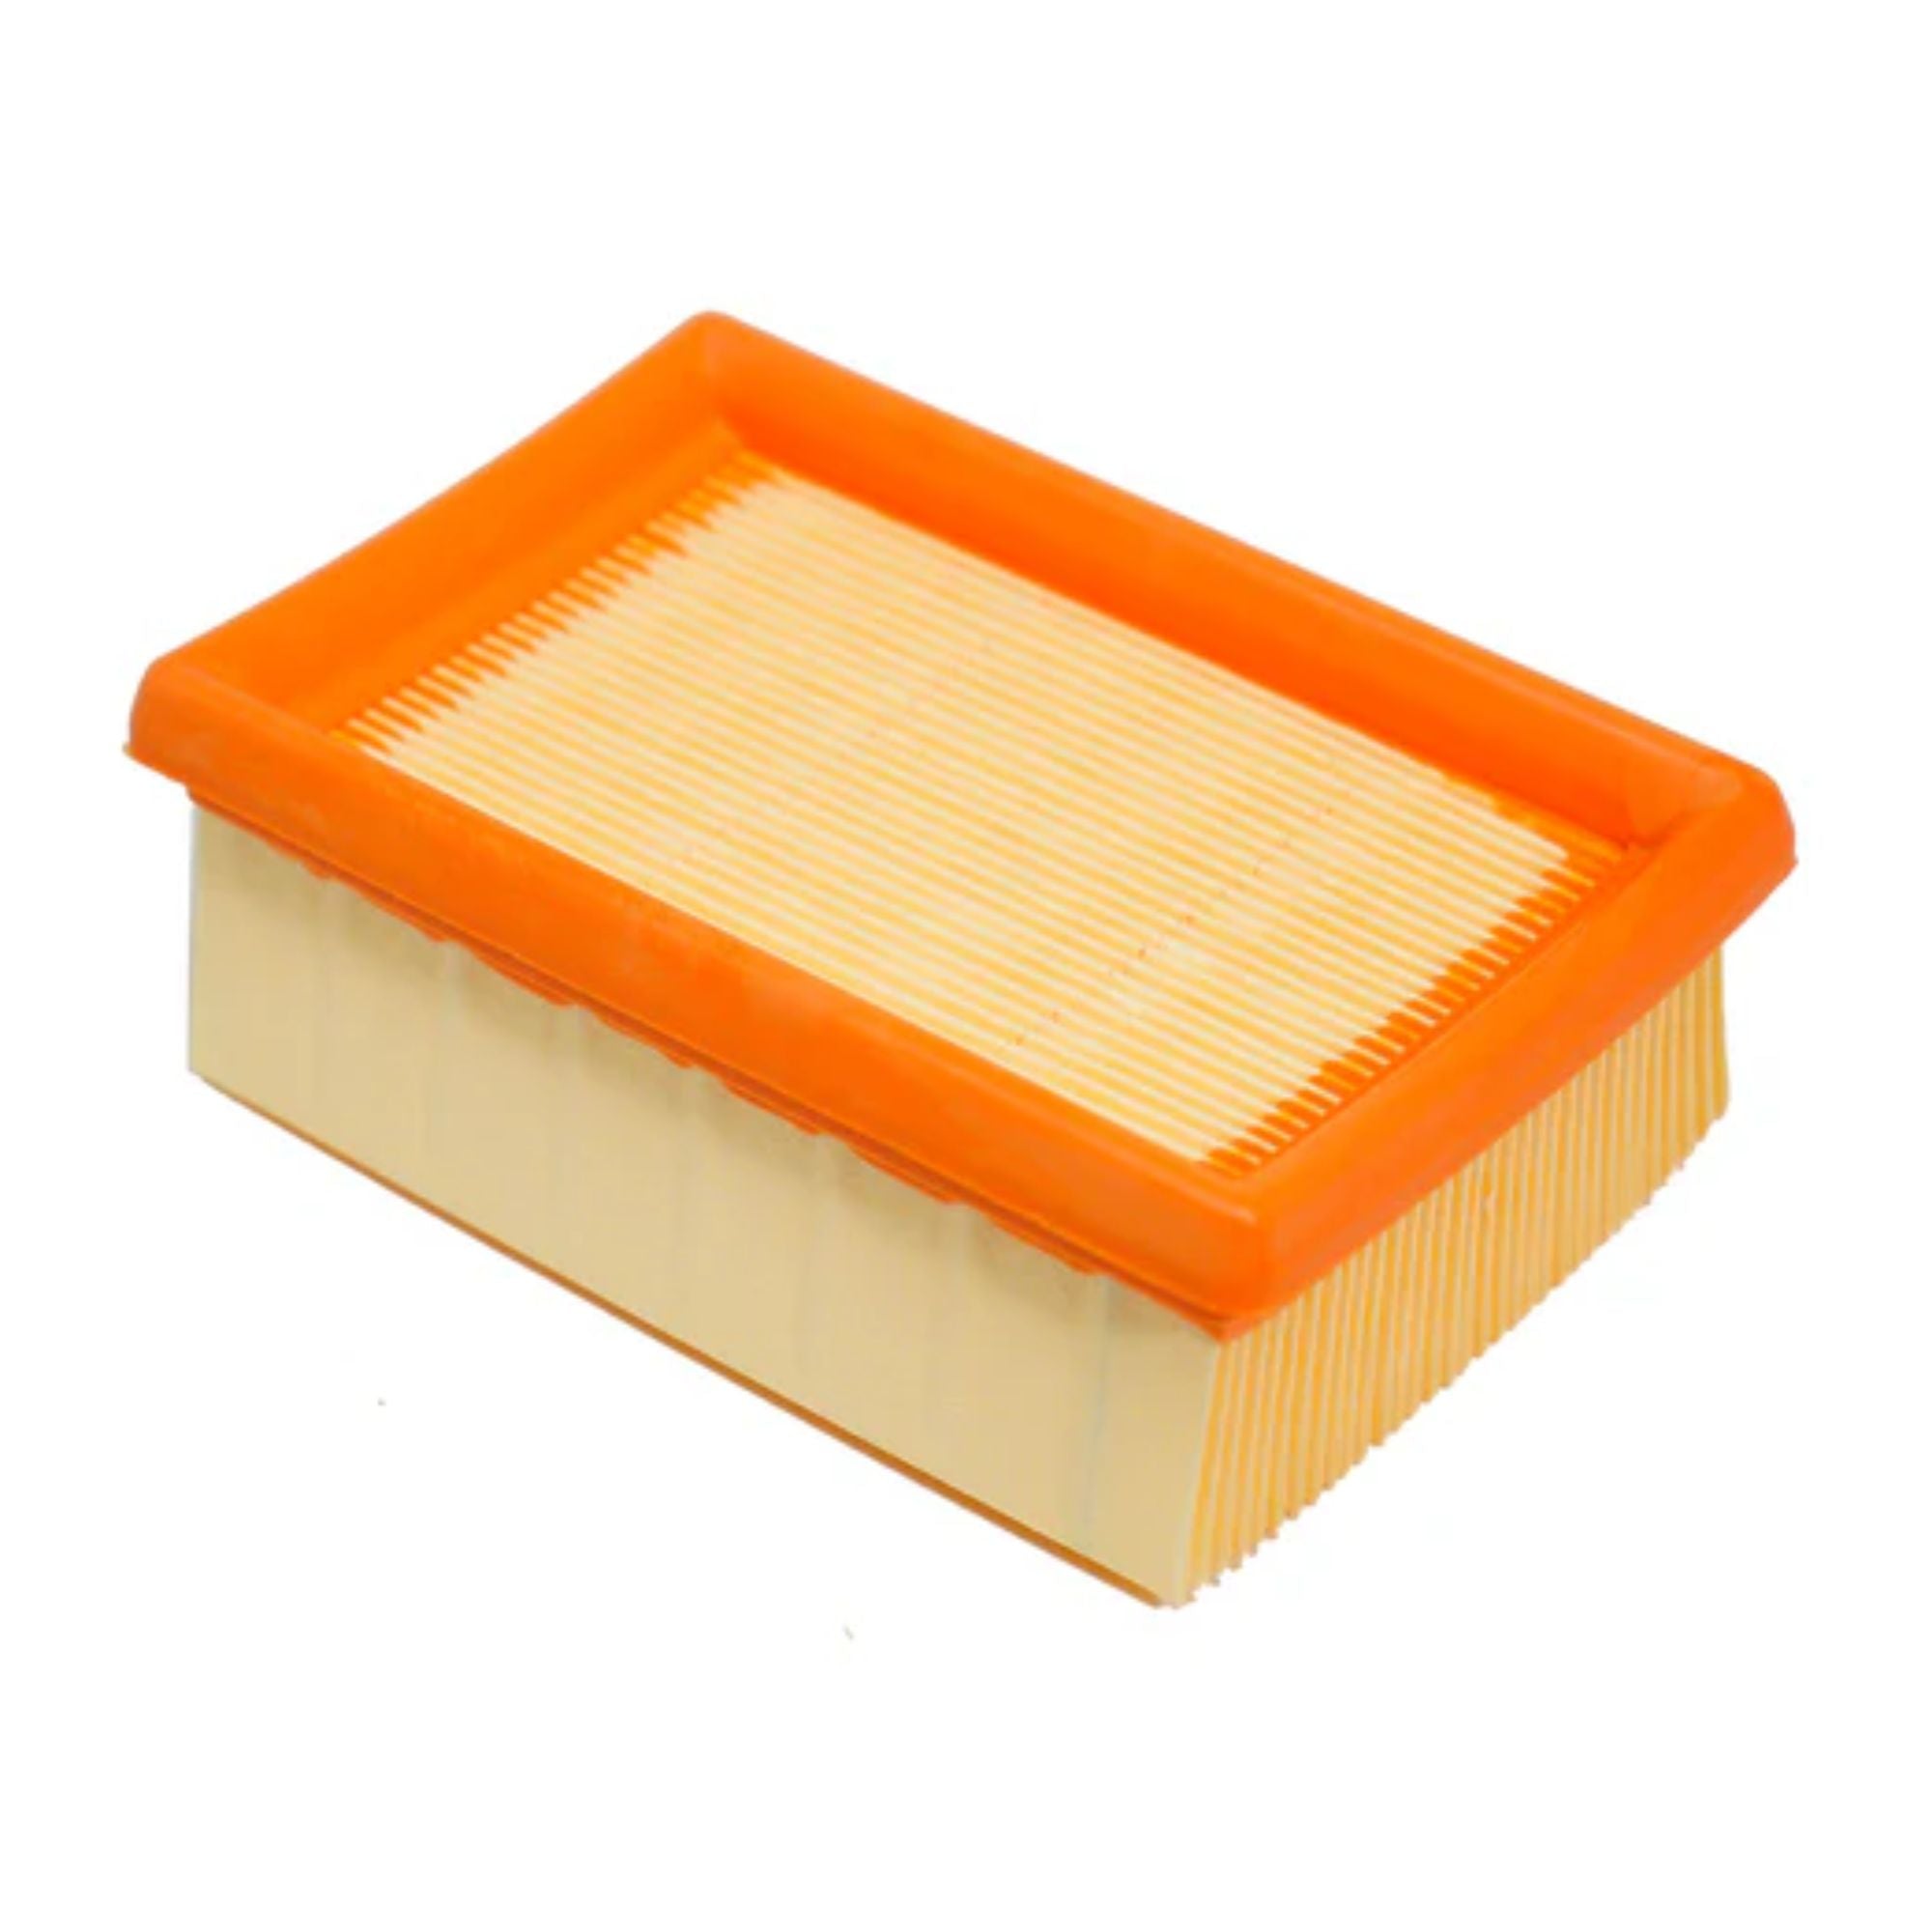 STIHL Air Filter for BR430 | 4223 141 0300